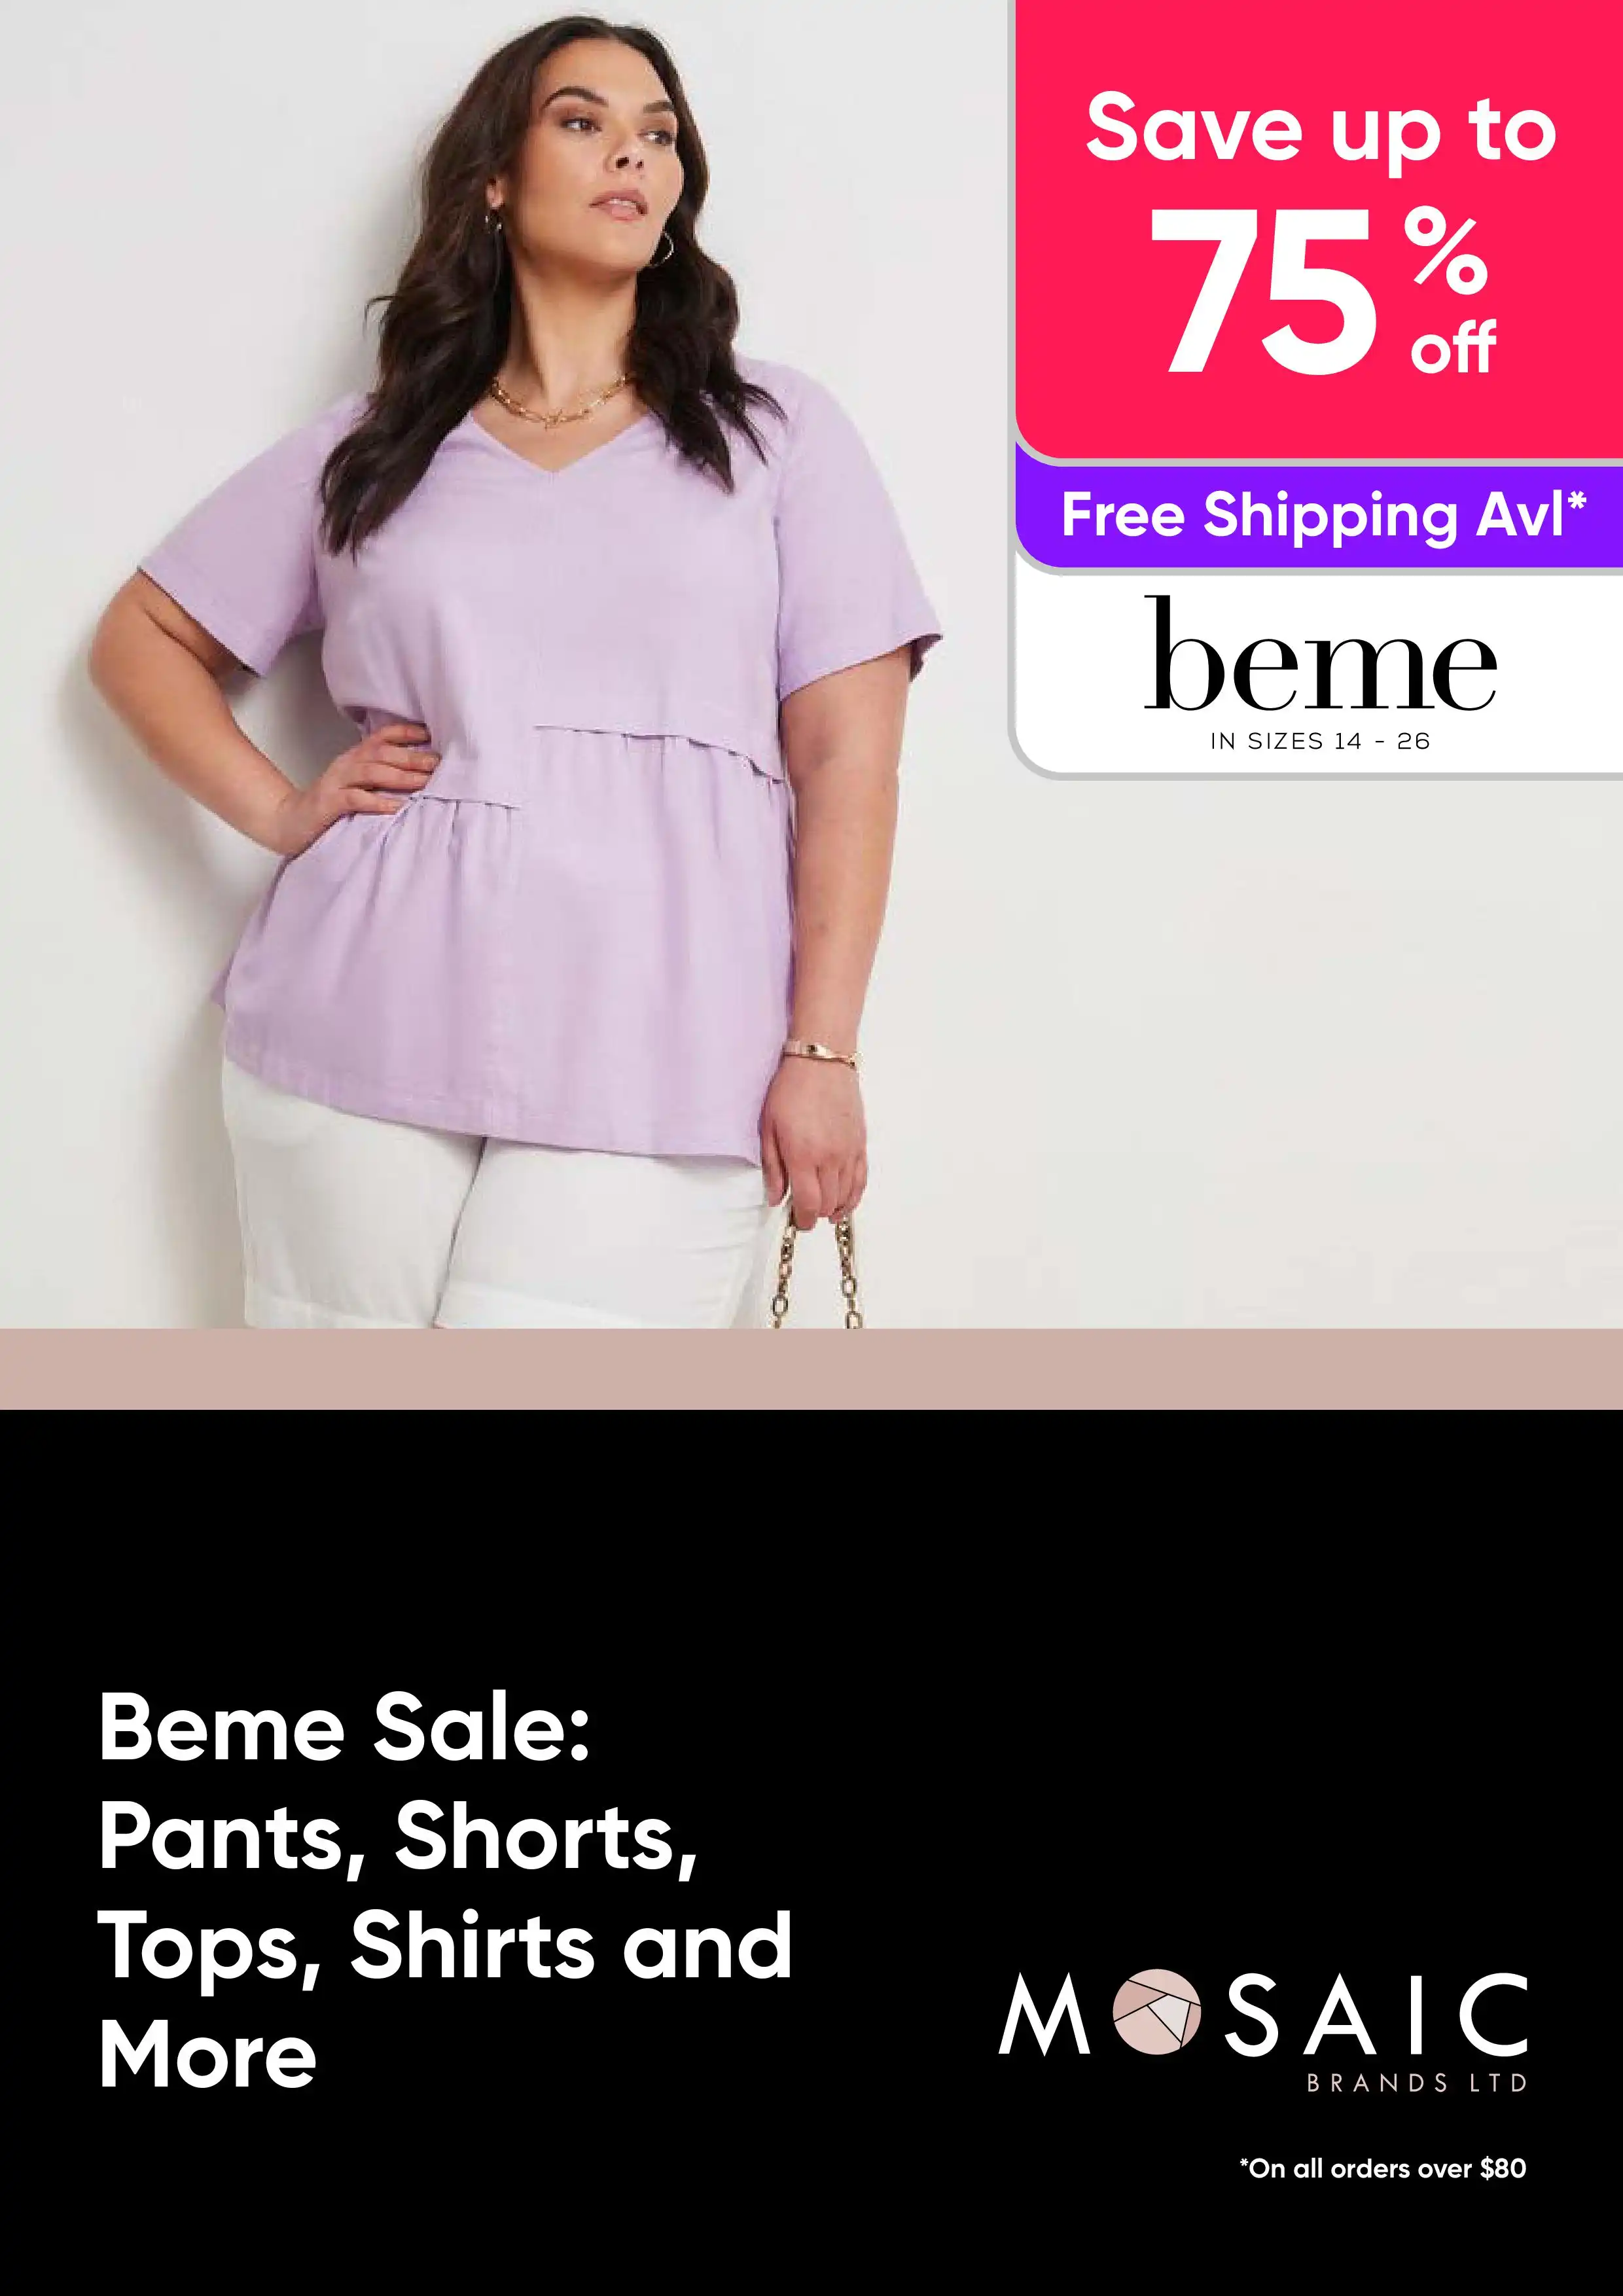 Beme Sale - Pants, Shorts, Tops, Shirts and More - up to 75% off